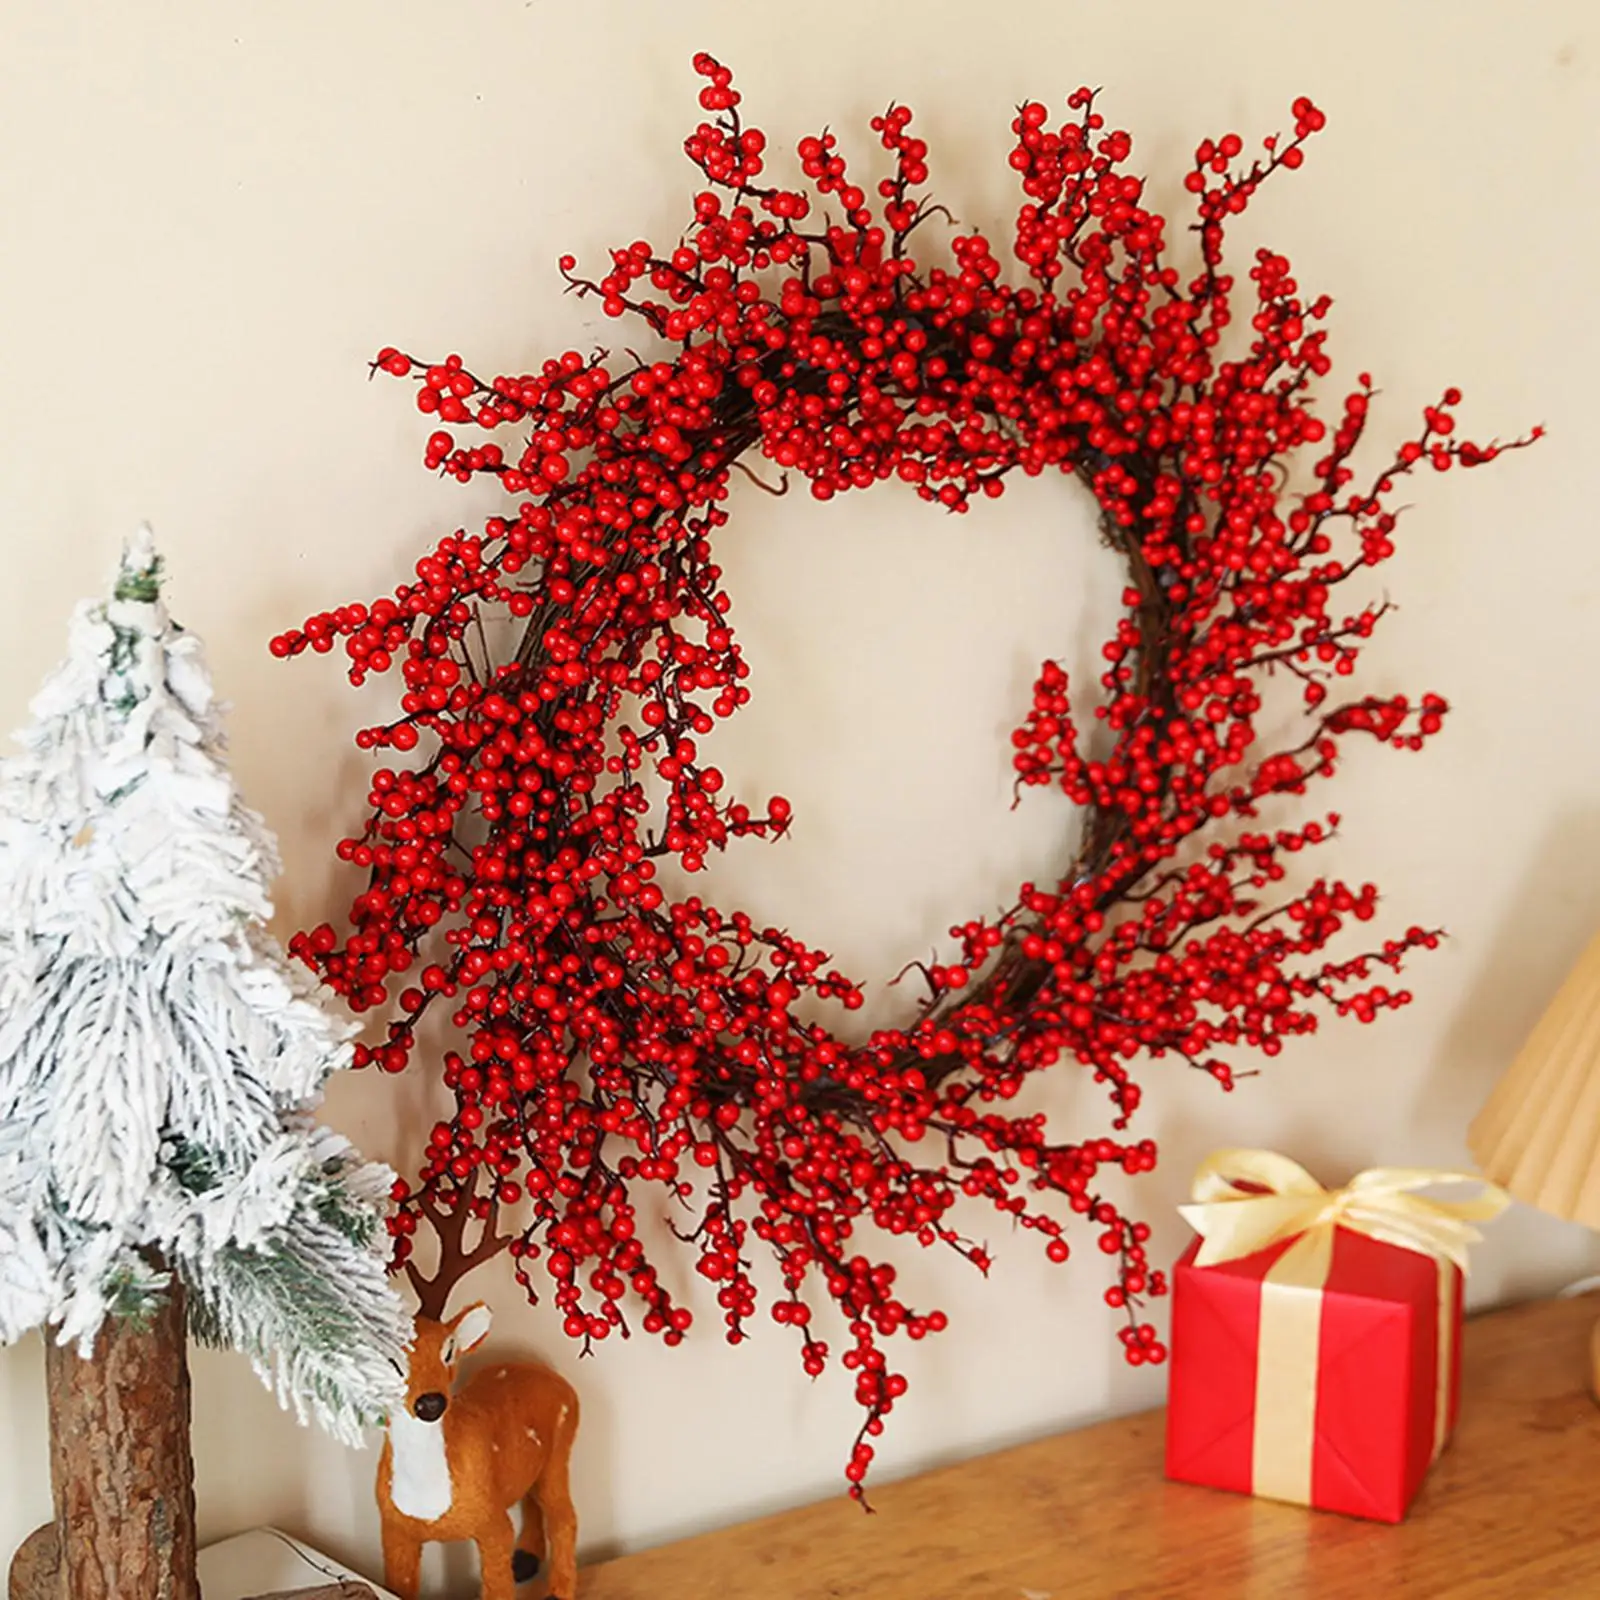 Christmas Wreath Decorated with Red Berries Artificial Wreath Xmas Decor Hanging Ornament for Holiday House Wall Wedding Party